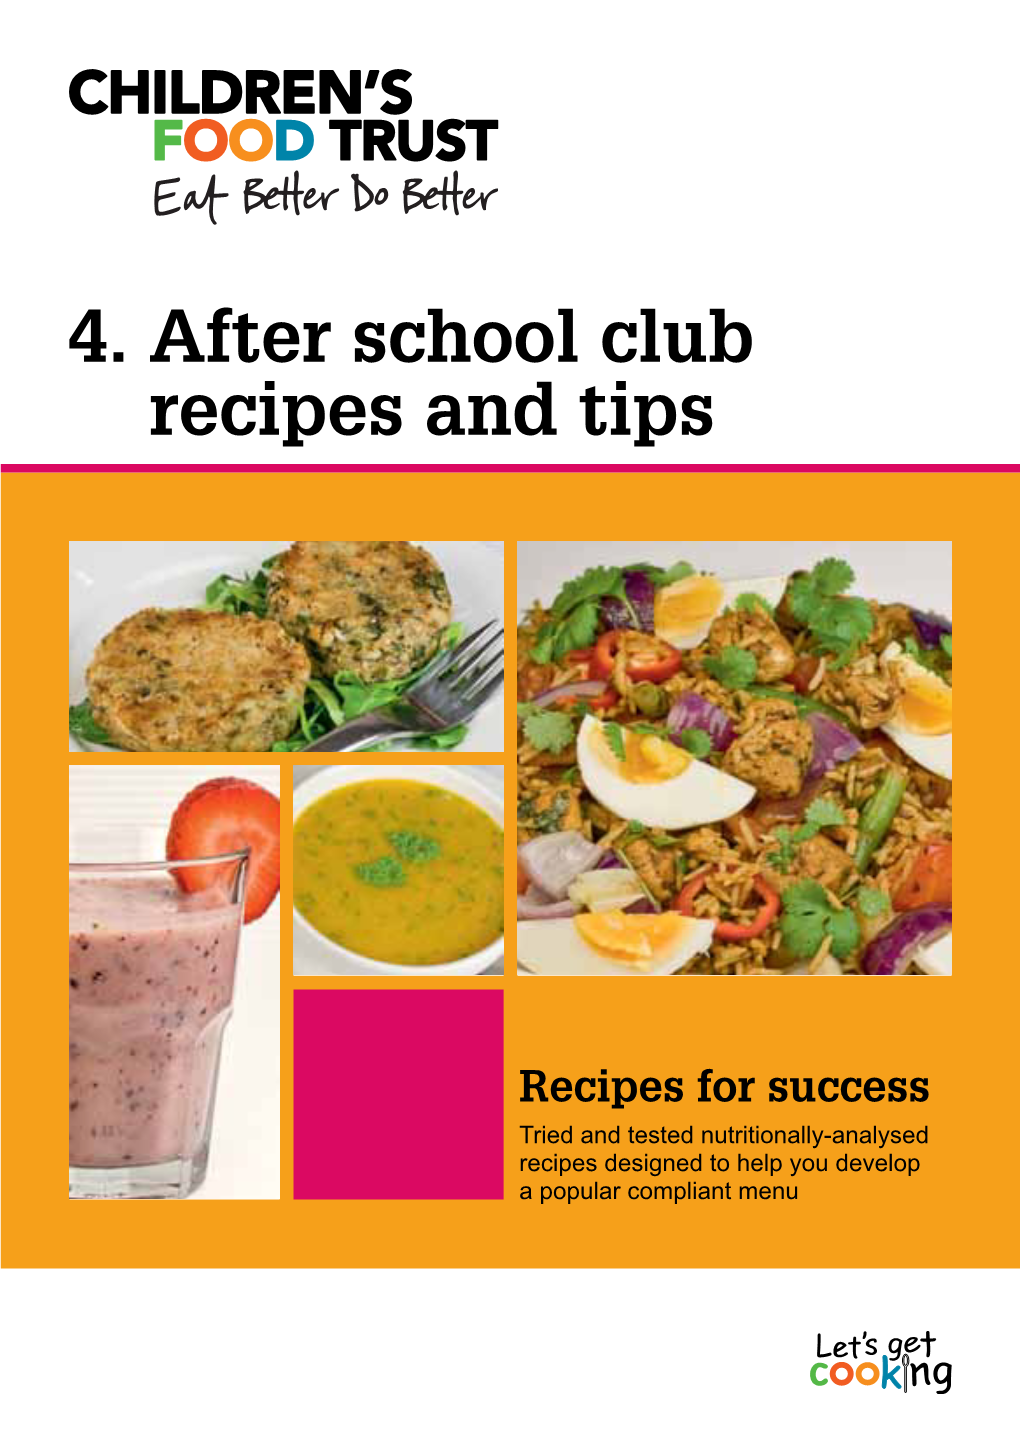 4. After School Club Recipes and Tips